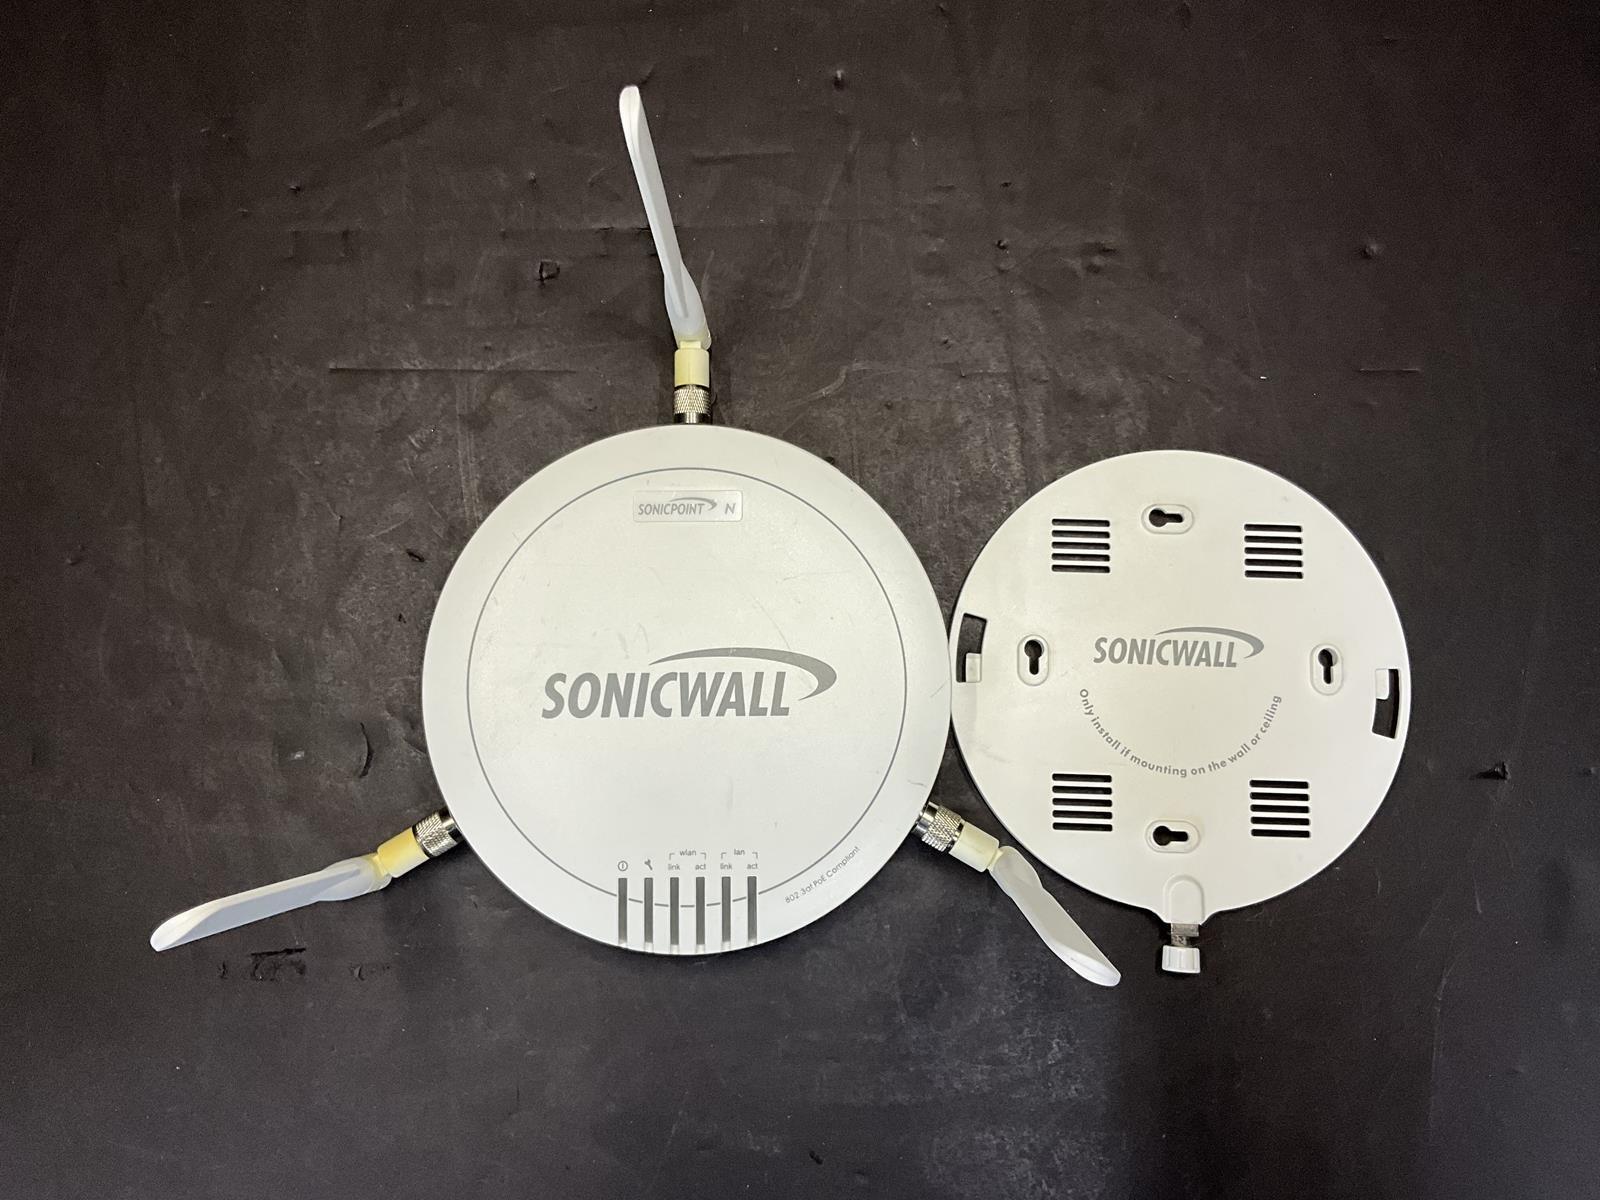 SonicWALL APL21-069 Dual Band SonicPoint N Wireless Access Point w/ Mount Plate